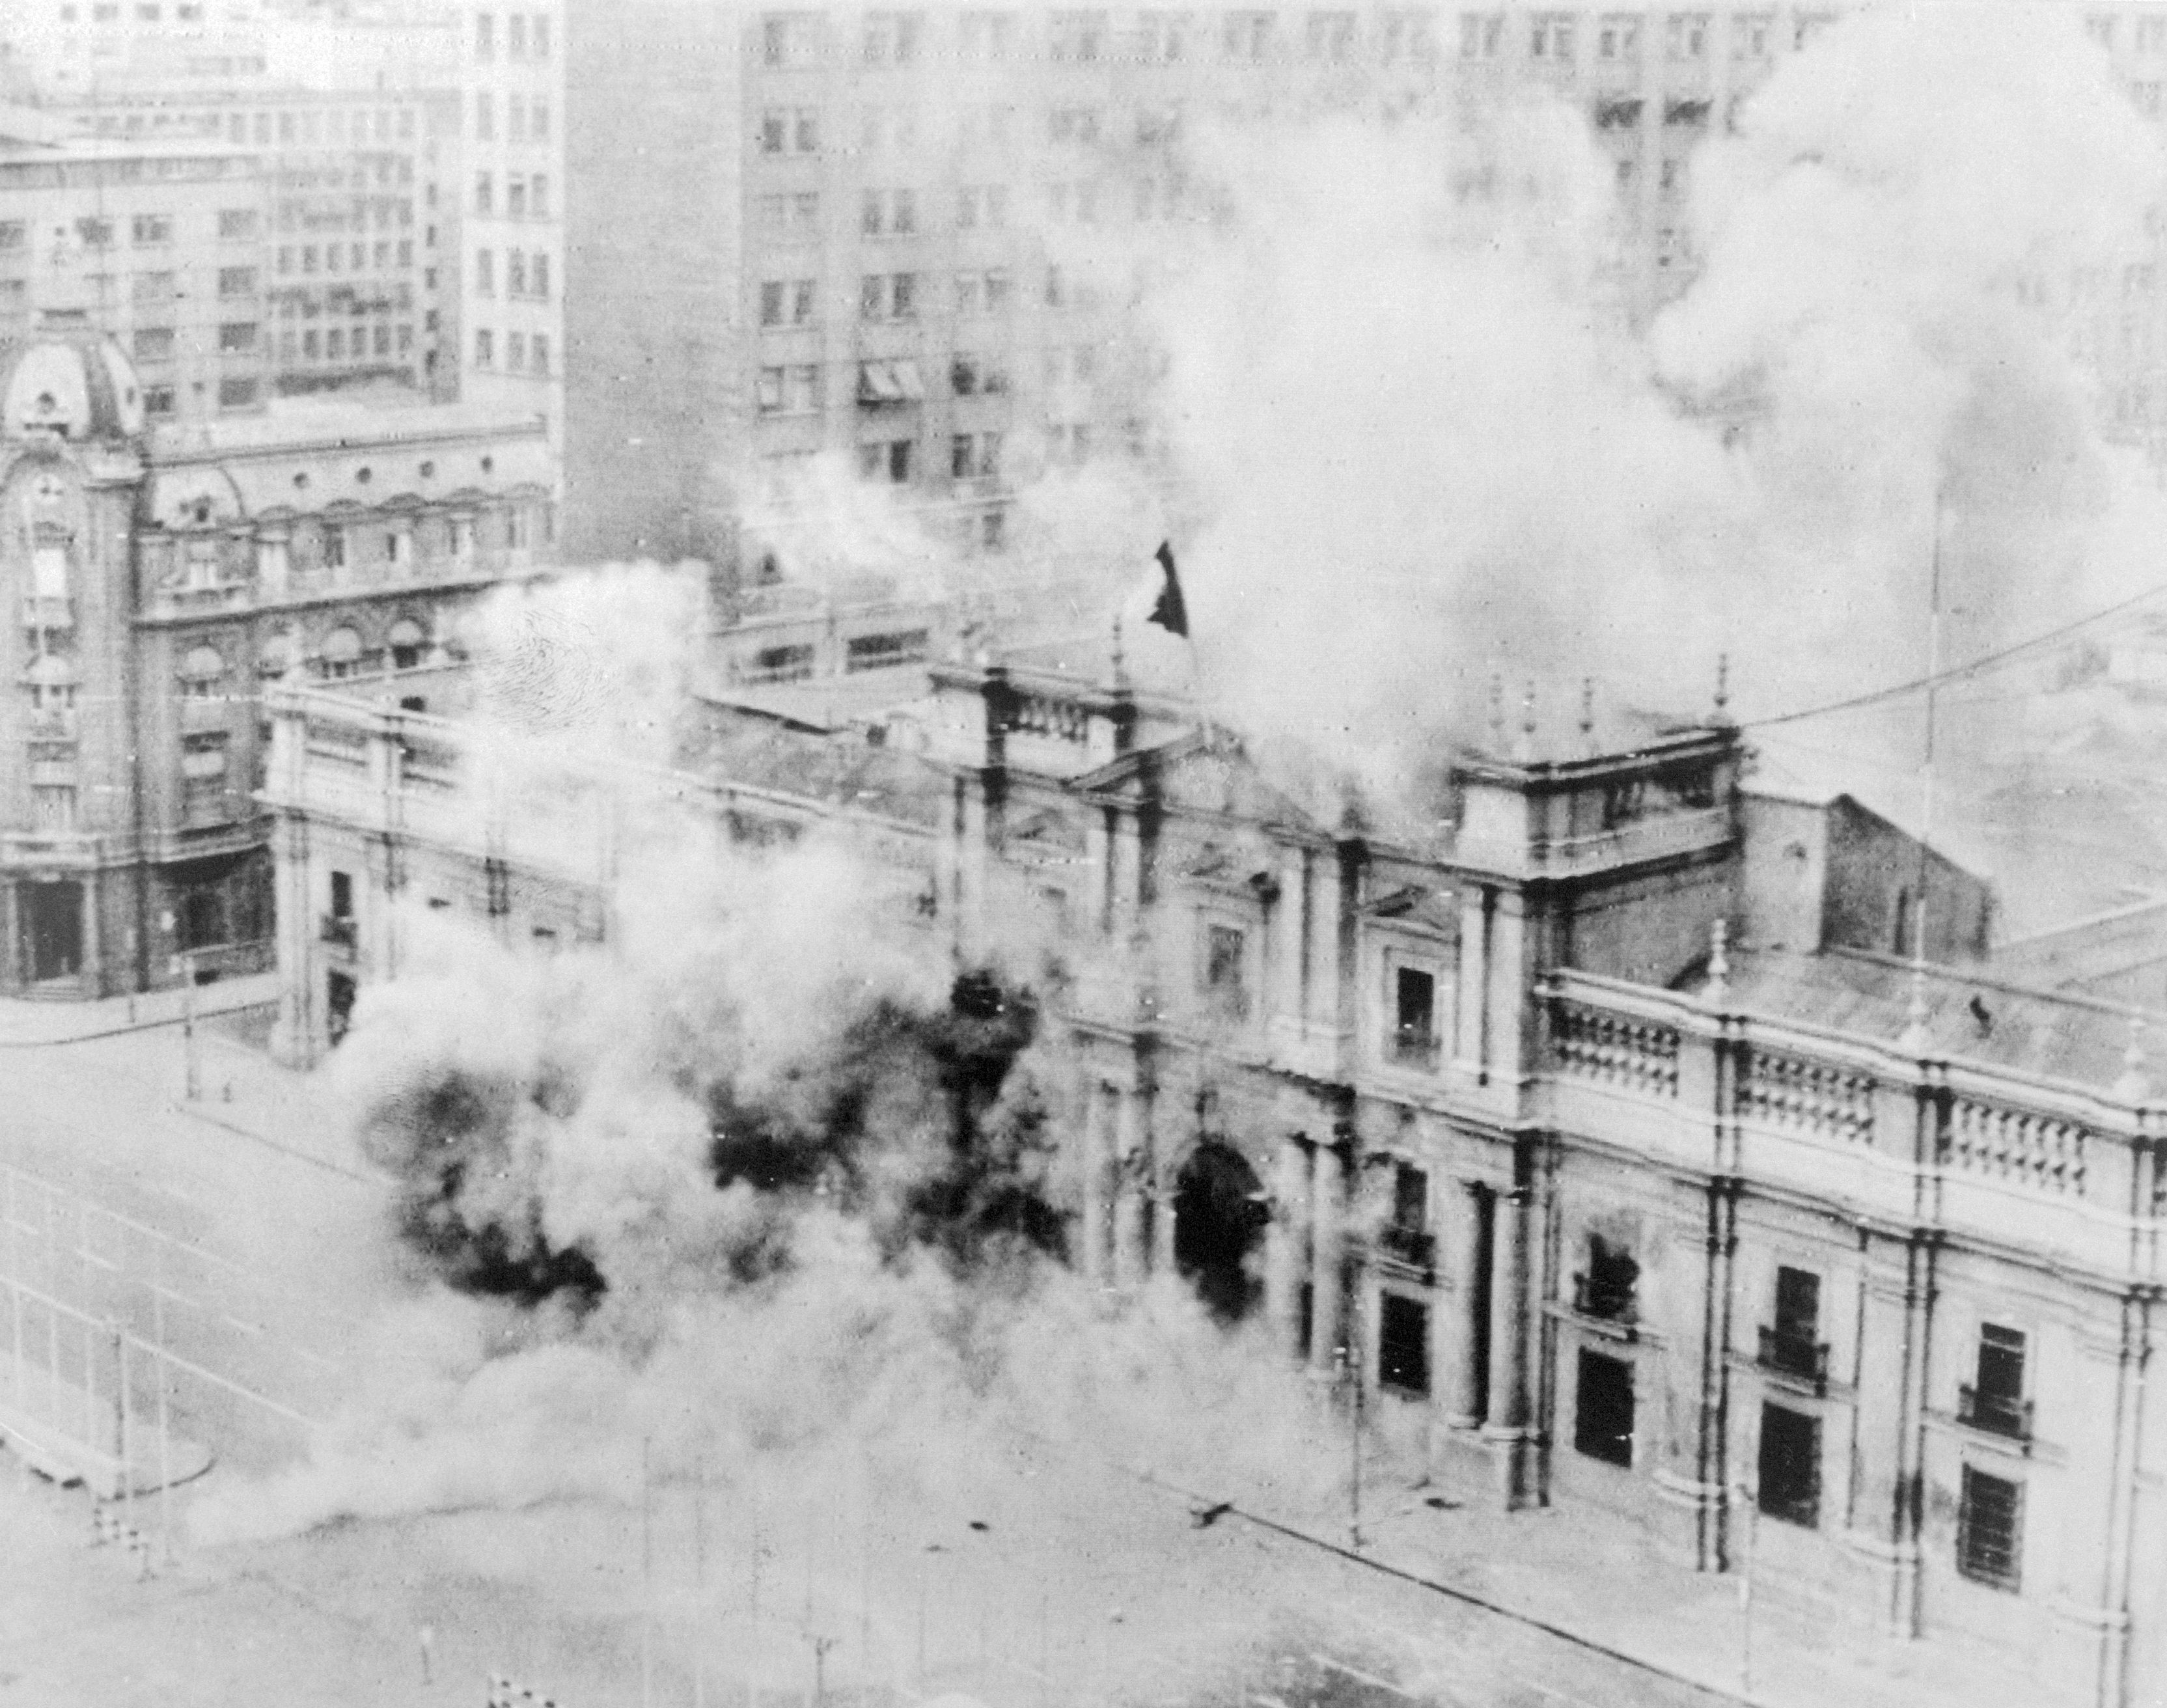 Chile's national palace is seen being engulfed in smoke during a coup on September 11, 1973